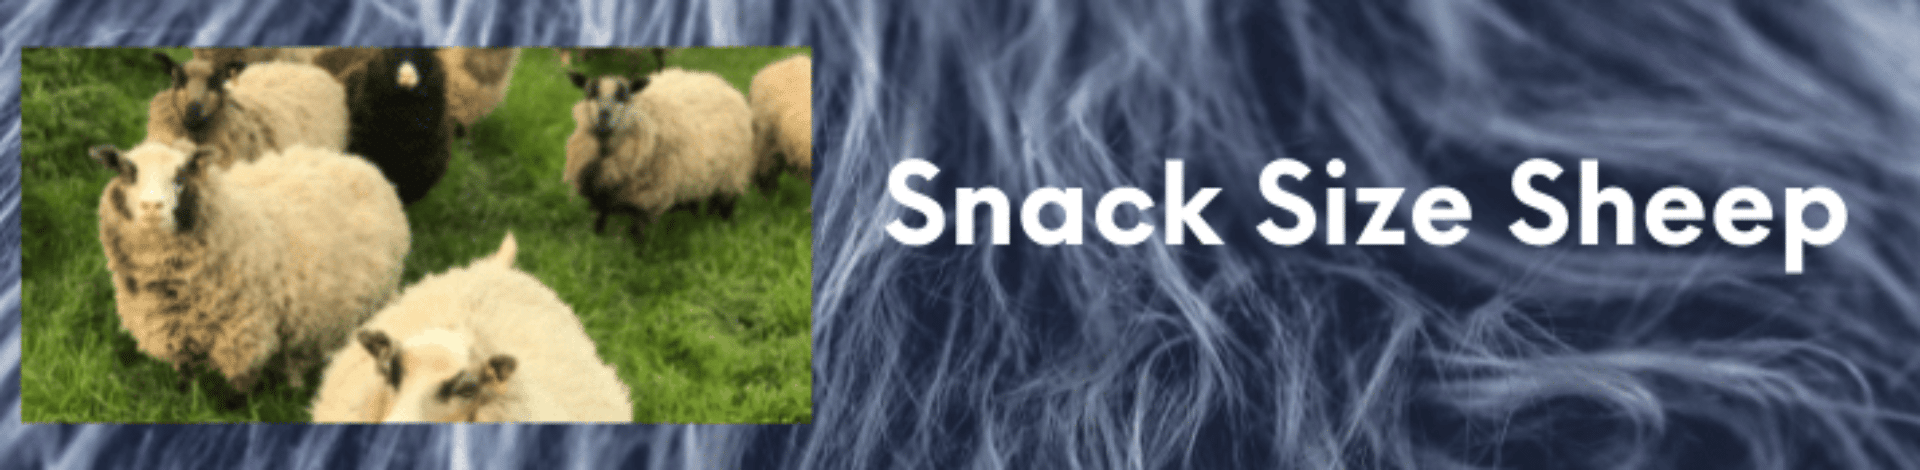 snack size sheep